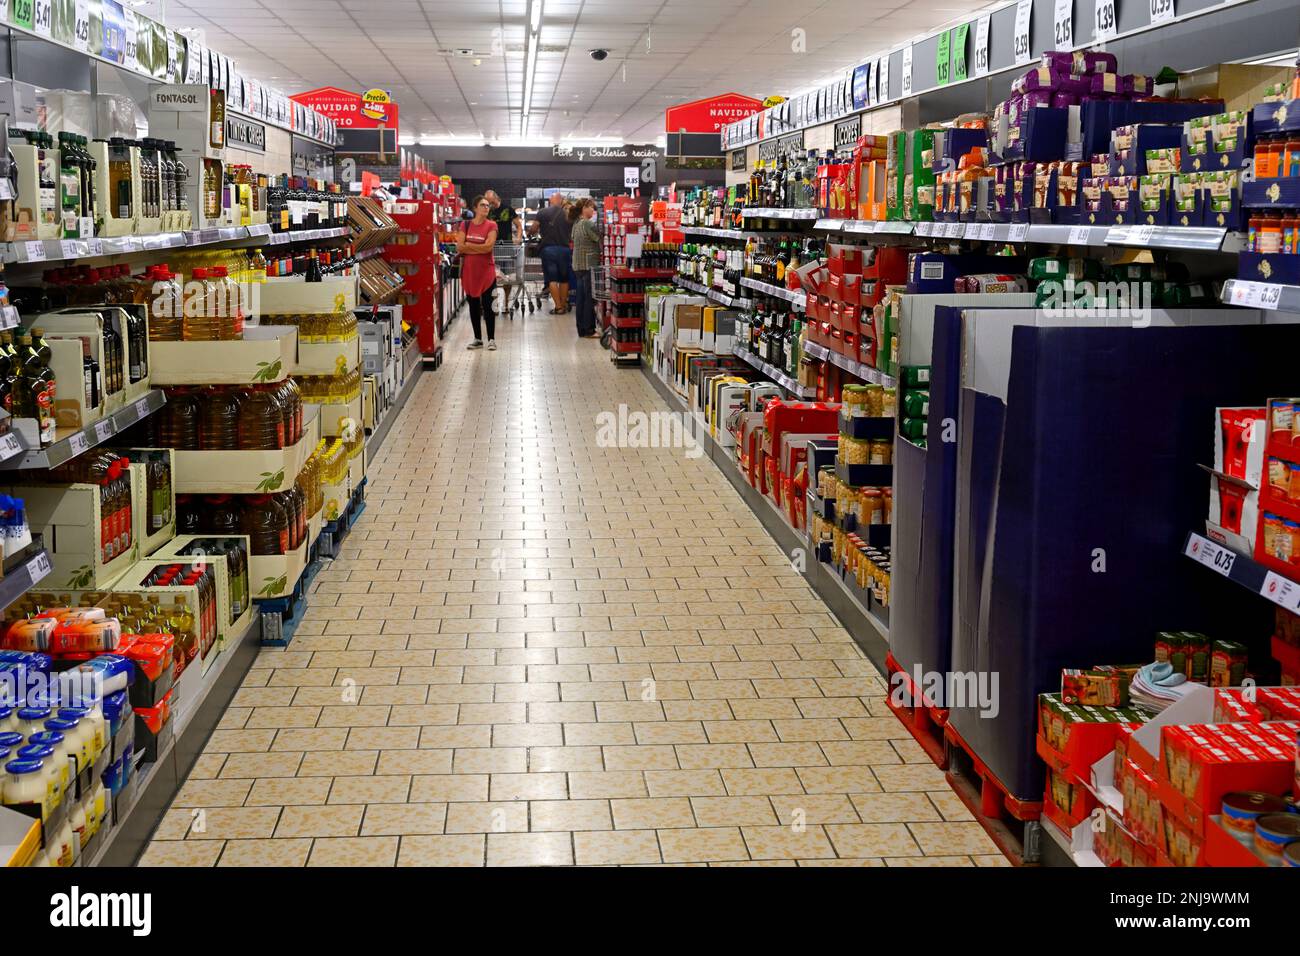 Inside supermarket with aisle full of mixed food items and customers Stock Photo